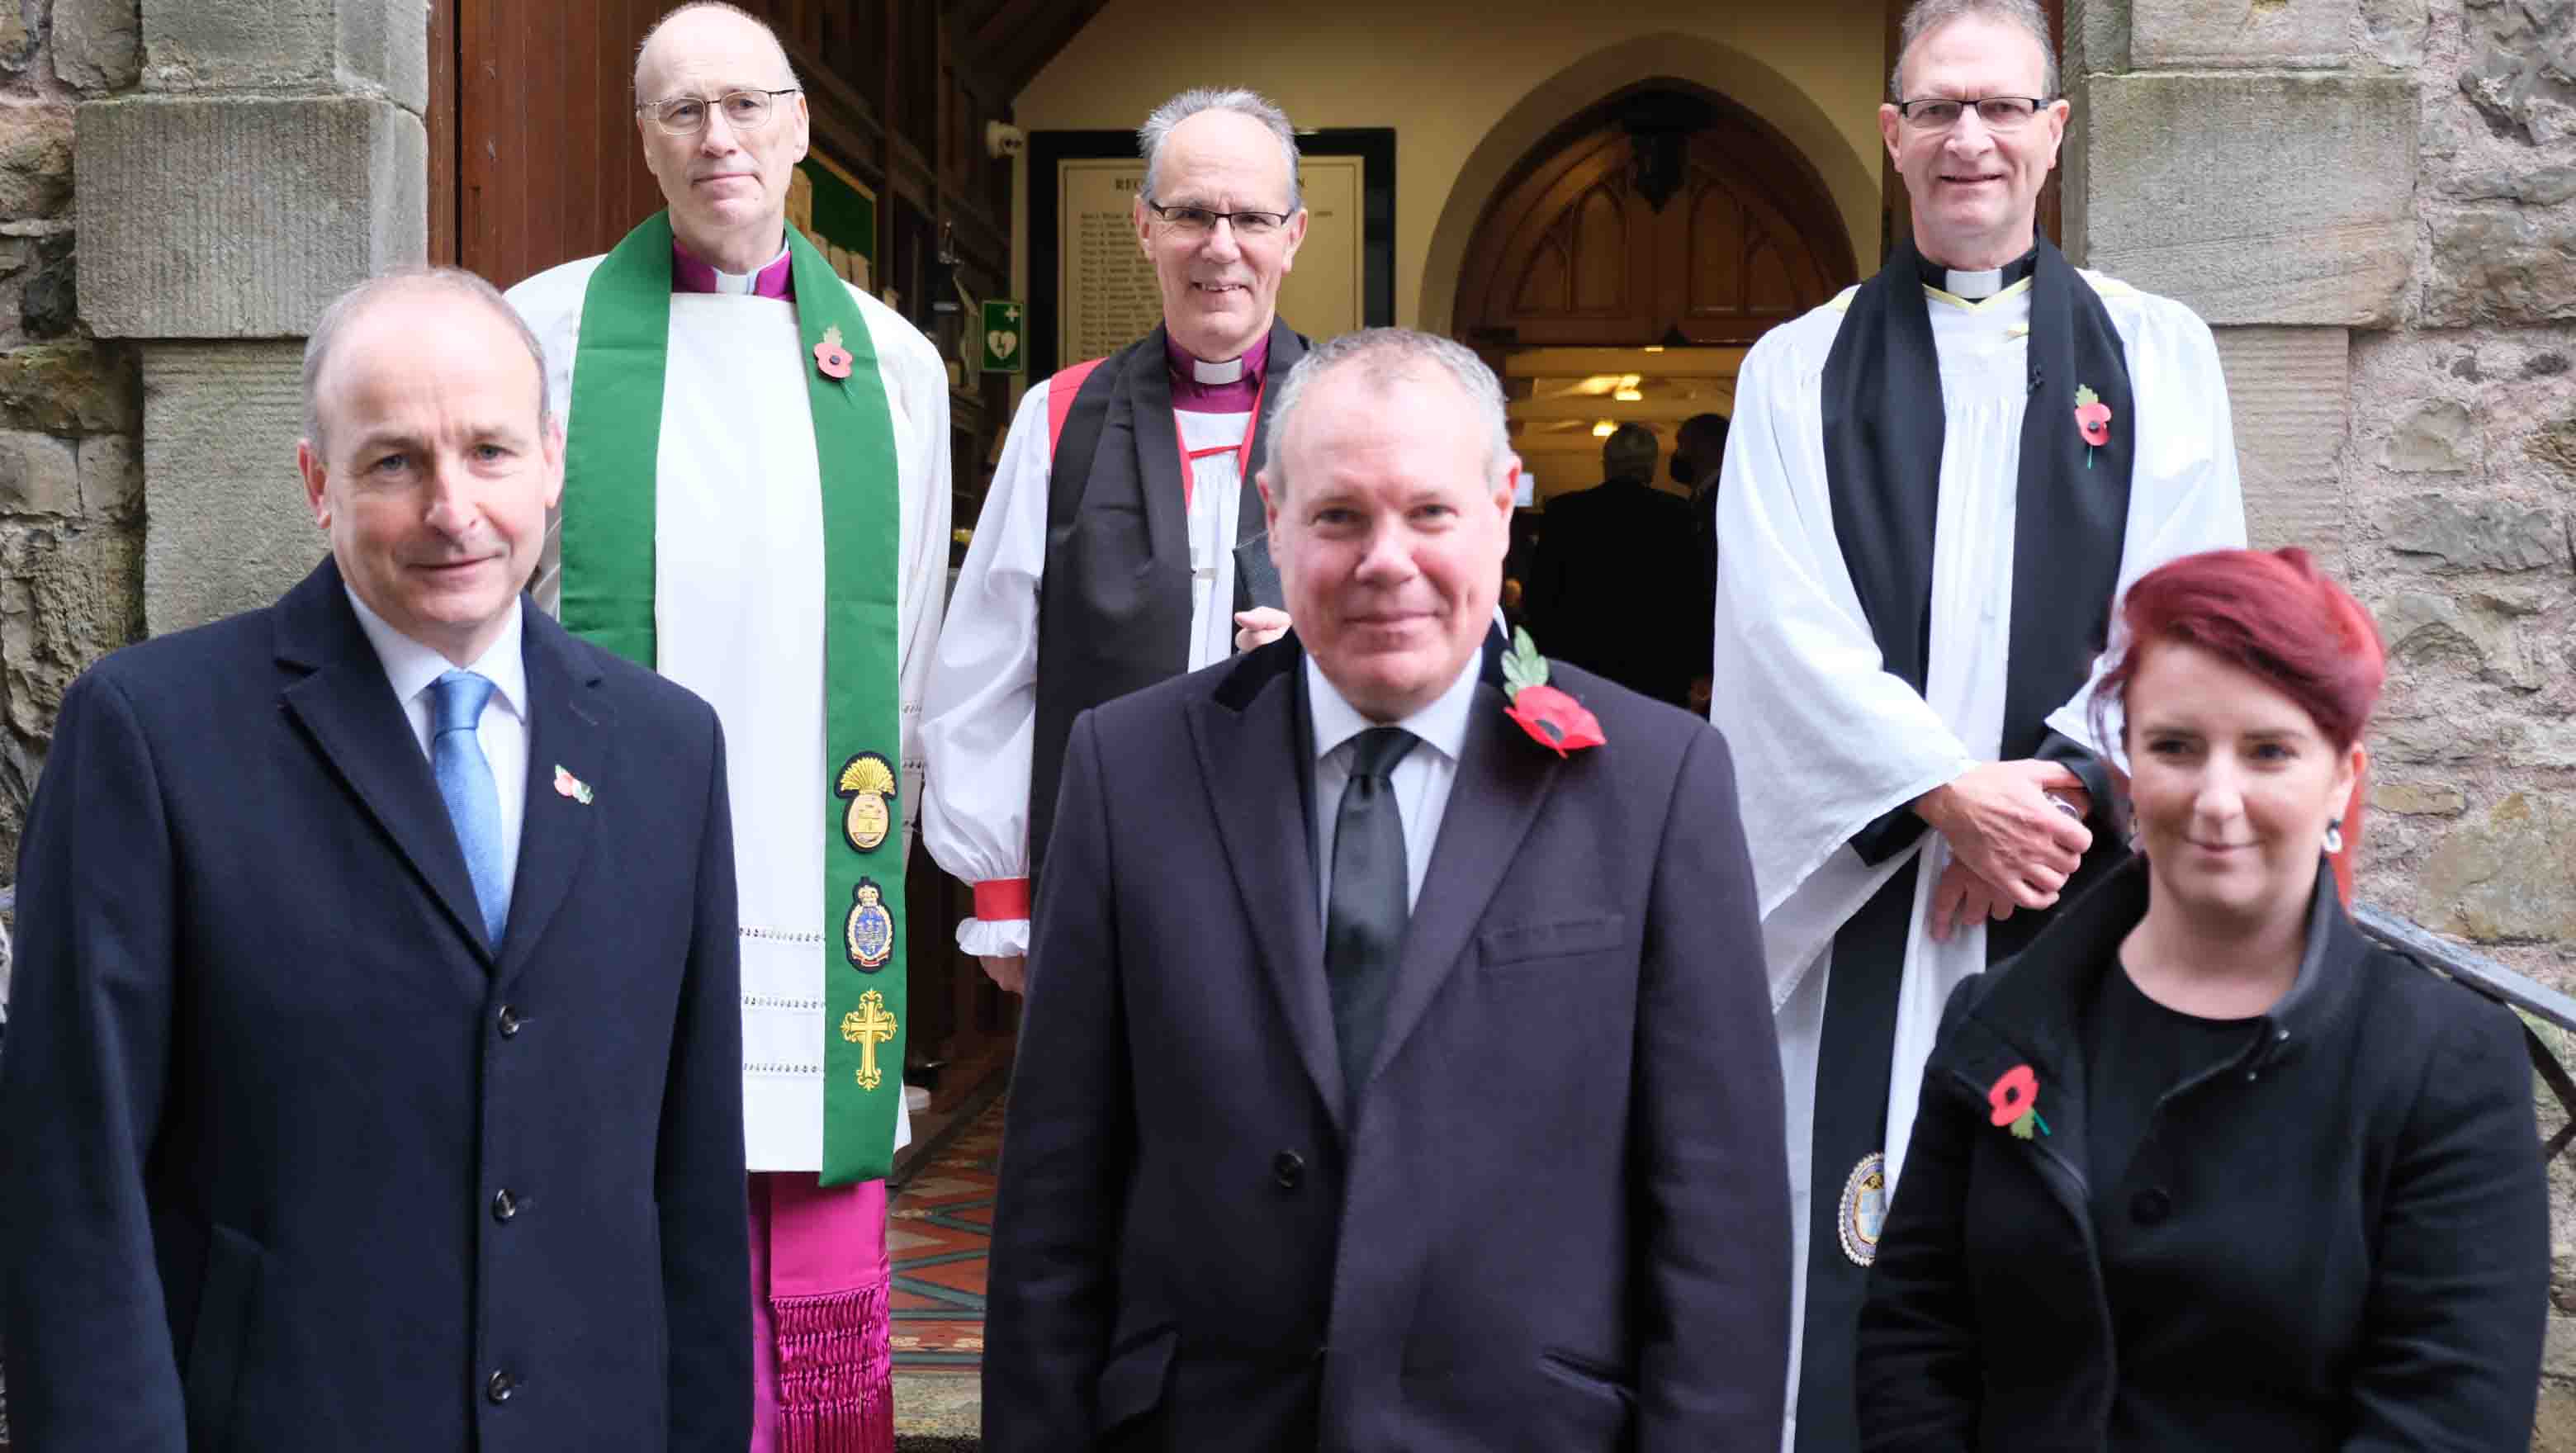 Attending the Remembrance Service were (front from left); Mr Micheál Martin TD, An Taoiseach; Mr Conor Burns MP, Minister of State; and Ms Louise Haigh MP, Shadow Secretary of State for Northern Ireland. Back row (from left): Monsignor Peter O'Reilly, the Bishop of Clogher, the Right Revd Dr Ian Ellis; and Dean Kenneth Hall.